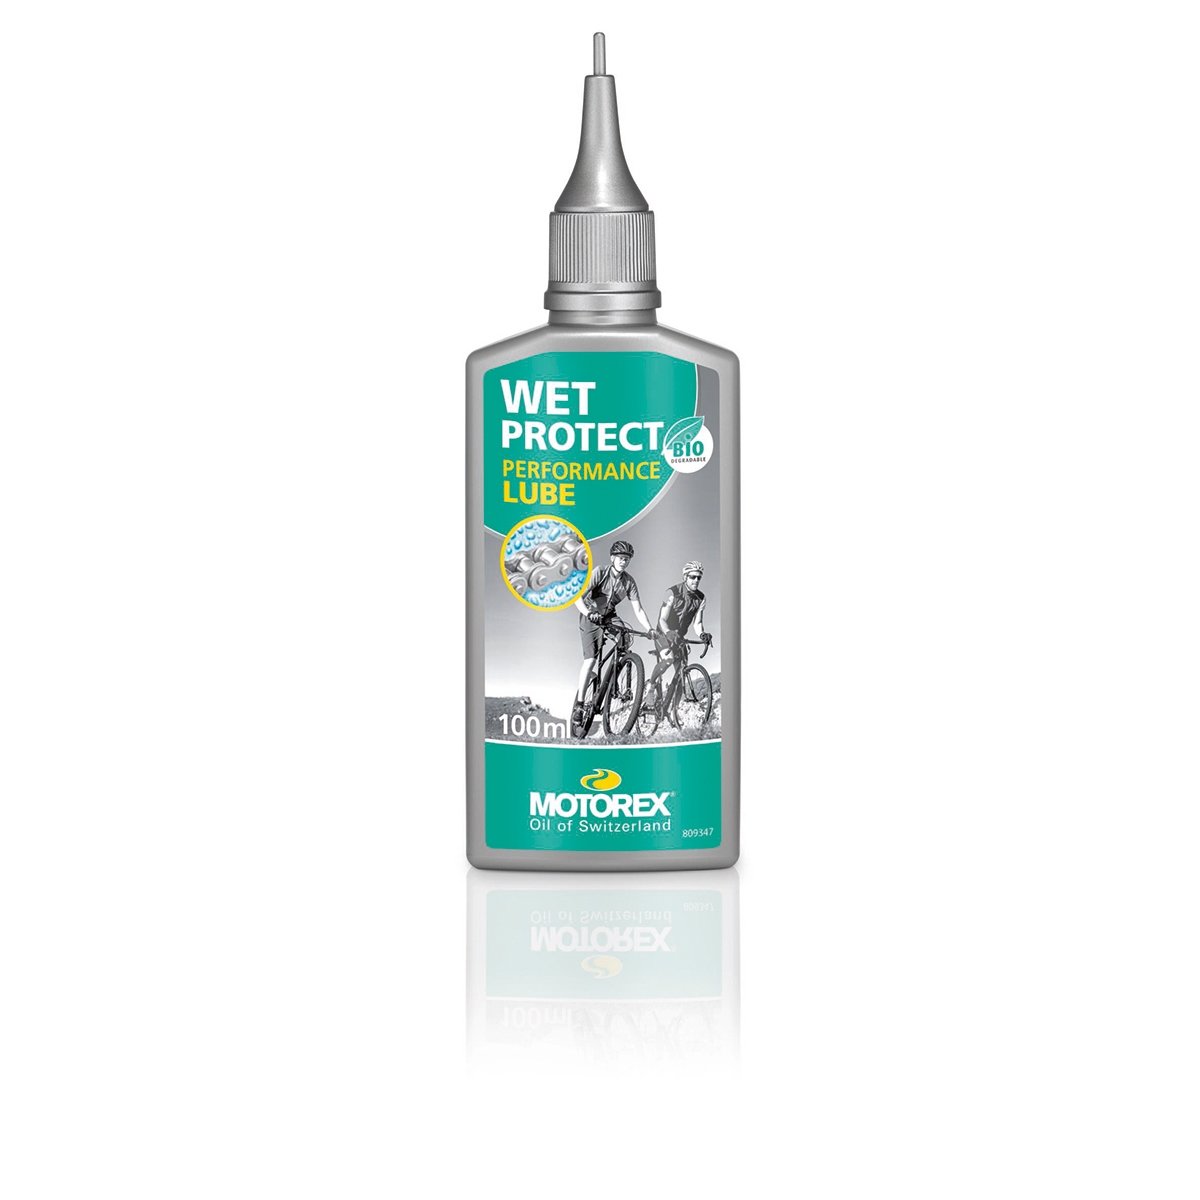 Wet Protect Lube Water Repellent Botella antioxidante 100ml